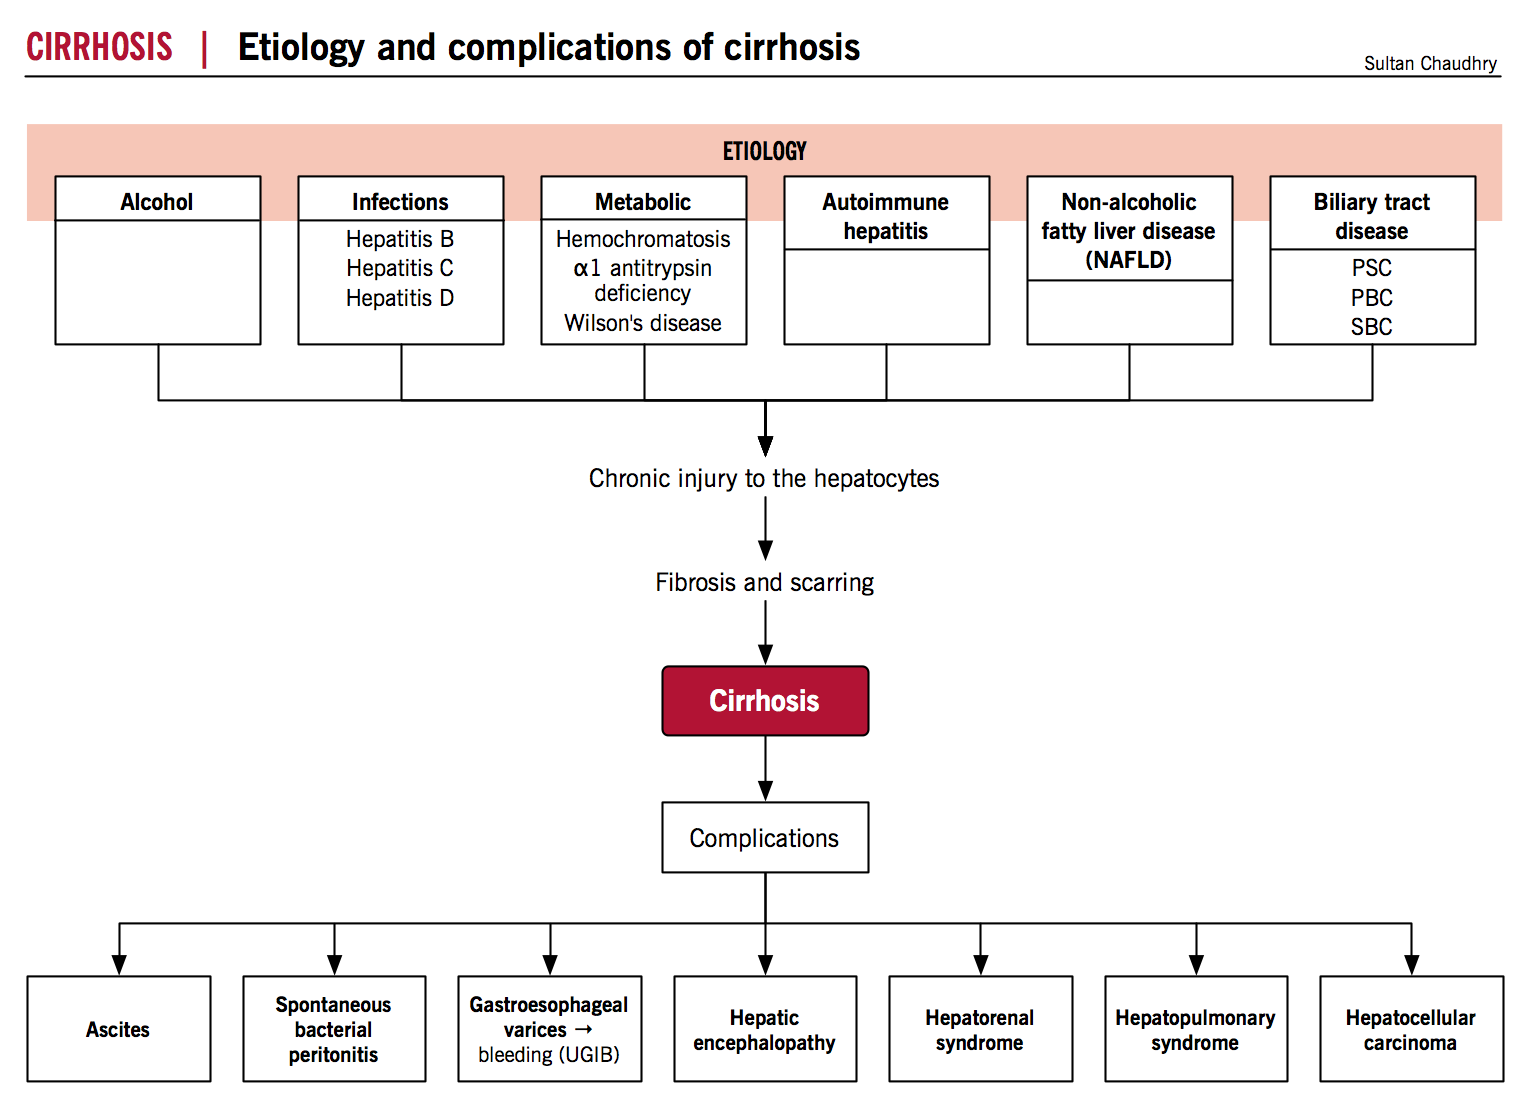 Etiology and complications of cirrhosis